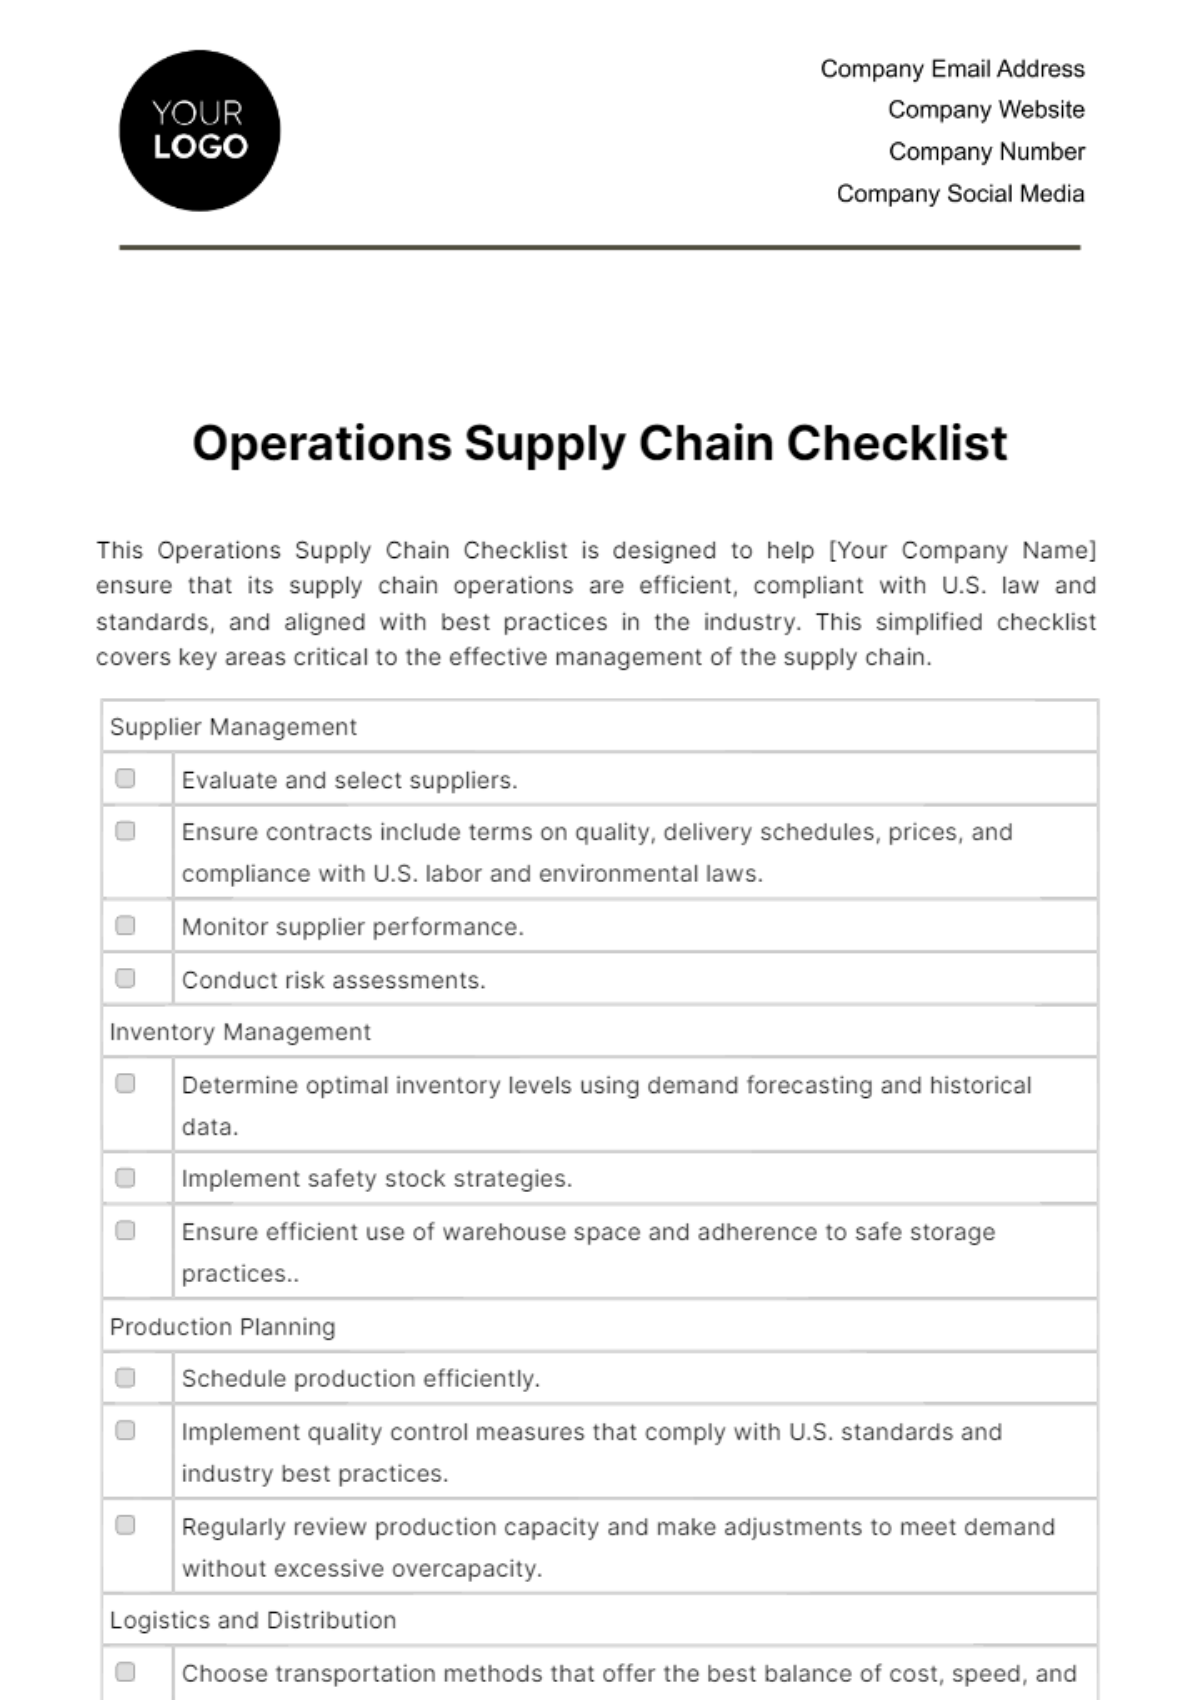 Operations Supply Chain Checklist Template